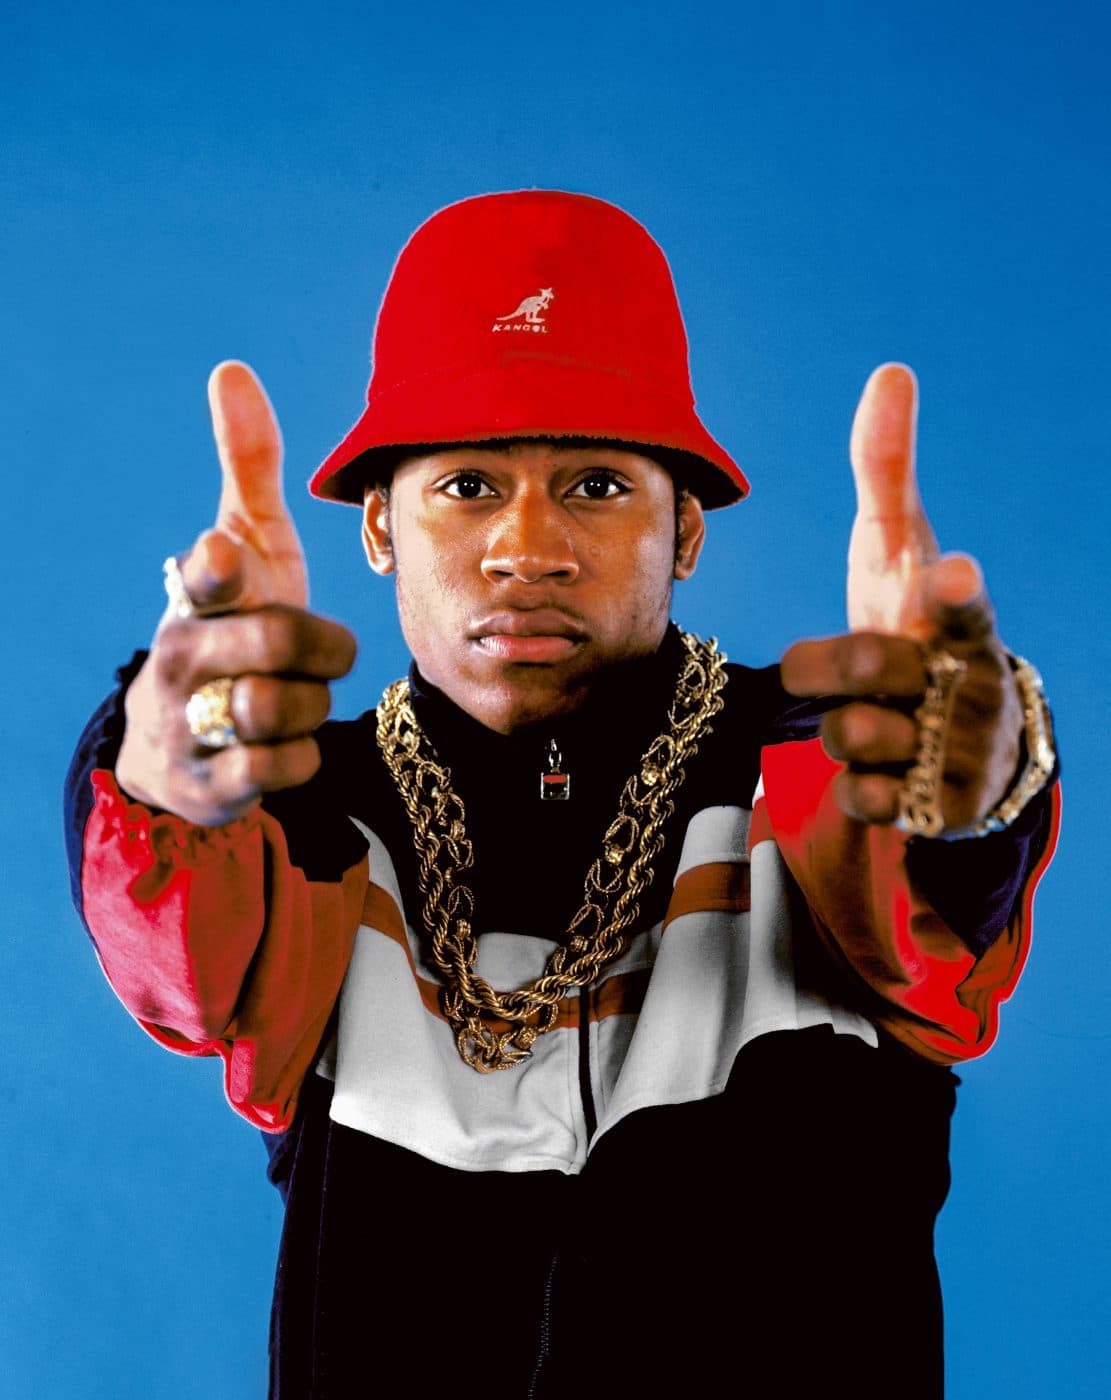 Portrait of LL Cool J in gold rope chains from Taschen book Ice Cold: A Hip-Hop Jewelry History book by Vikki Tobak, celebrates the sparkle and swagger of bling, placing it in a pop-culture context. The book features portraits of hip-hop's biggest stars from the past four decades, including LL Cool J, who contributed an essay to the book. He's seen here in his signature layers of gold rope chains 